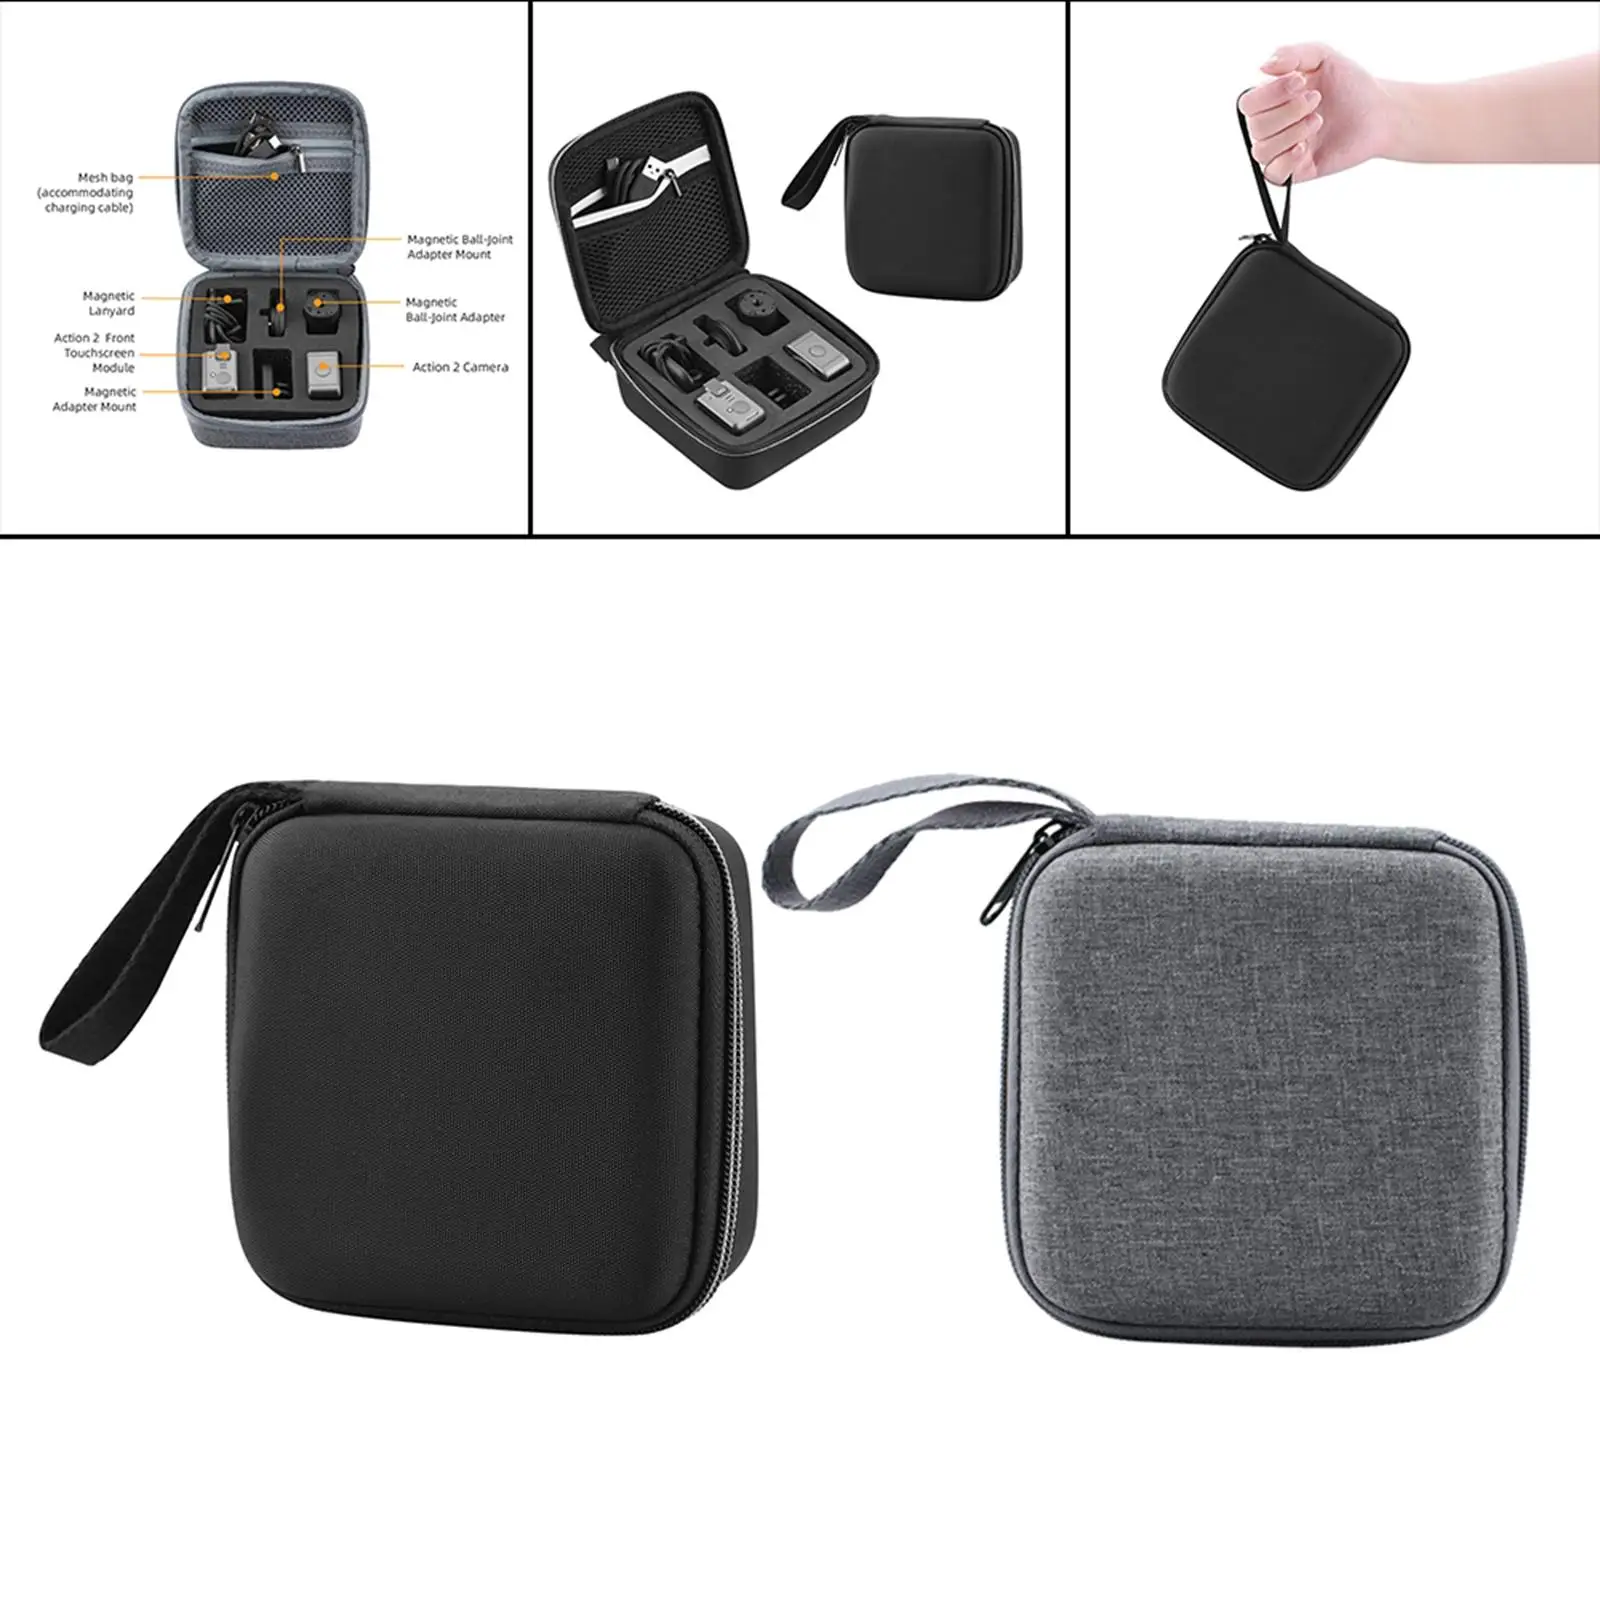 Storage Bag, Protective ,Portable Lanyard Travel Case Accessories Shock Absorber Handbag Carrying Case  2 Adapter Power Module